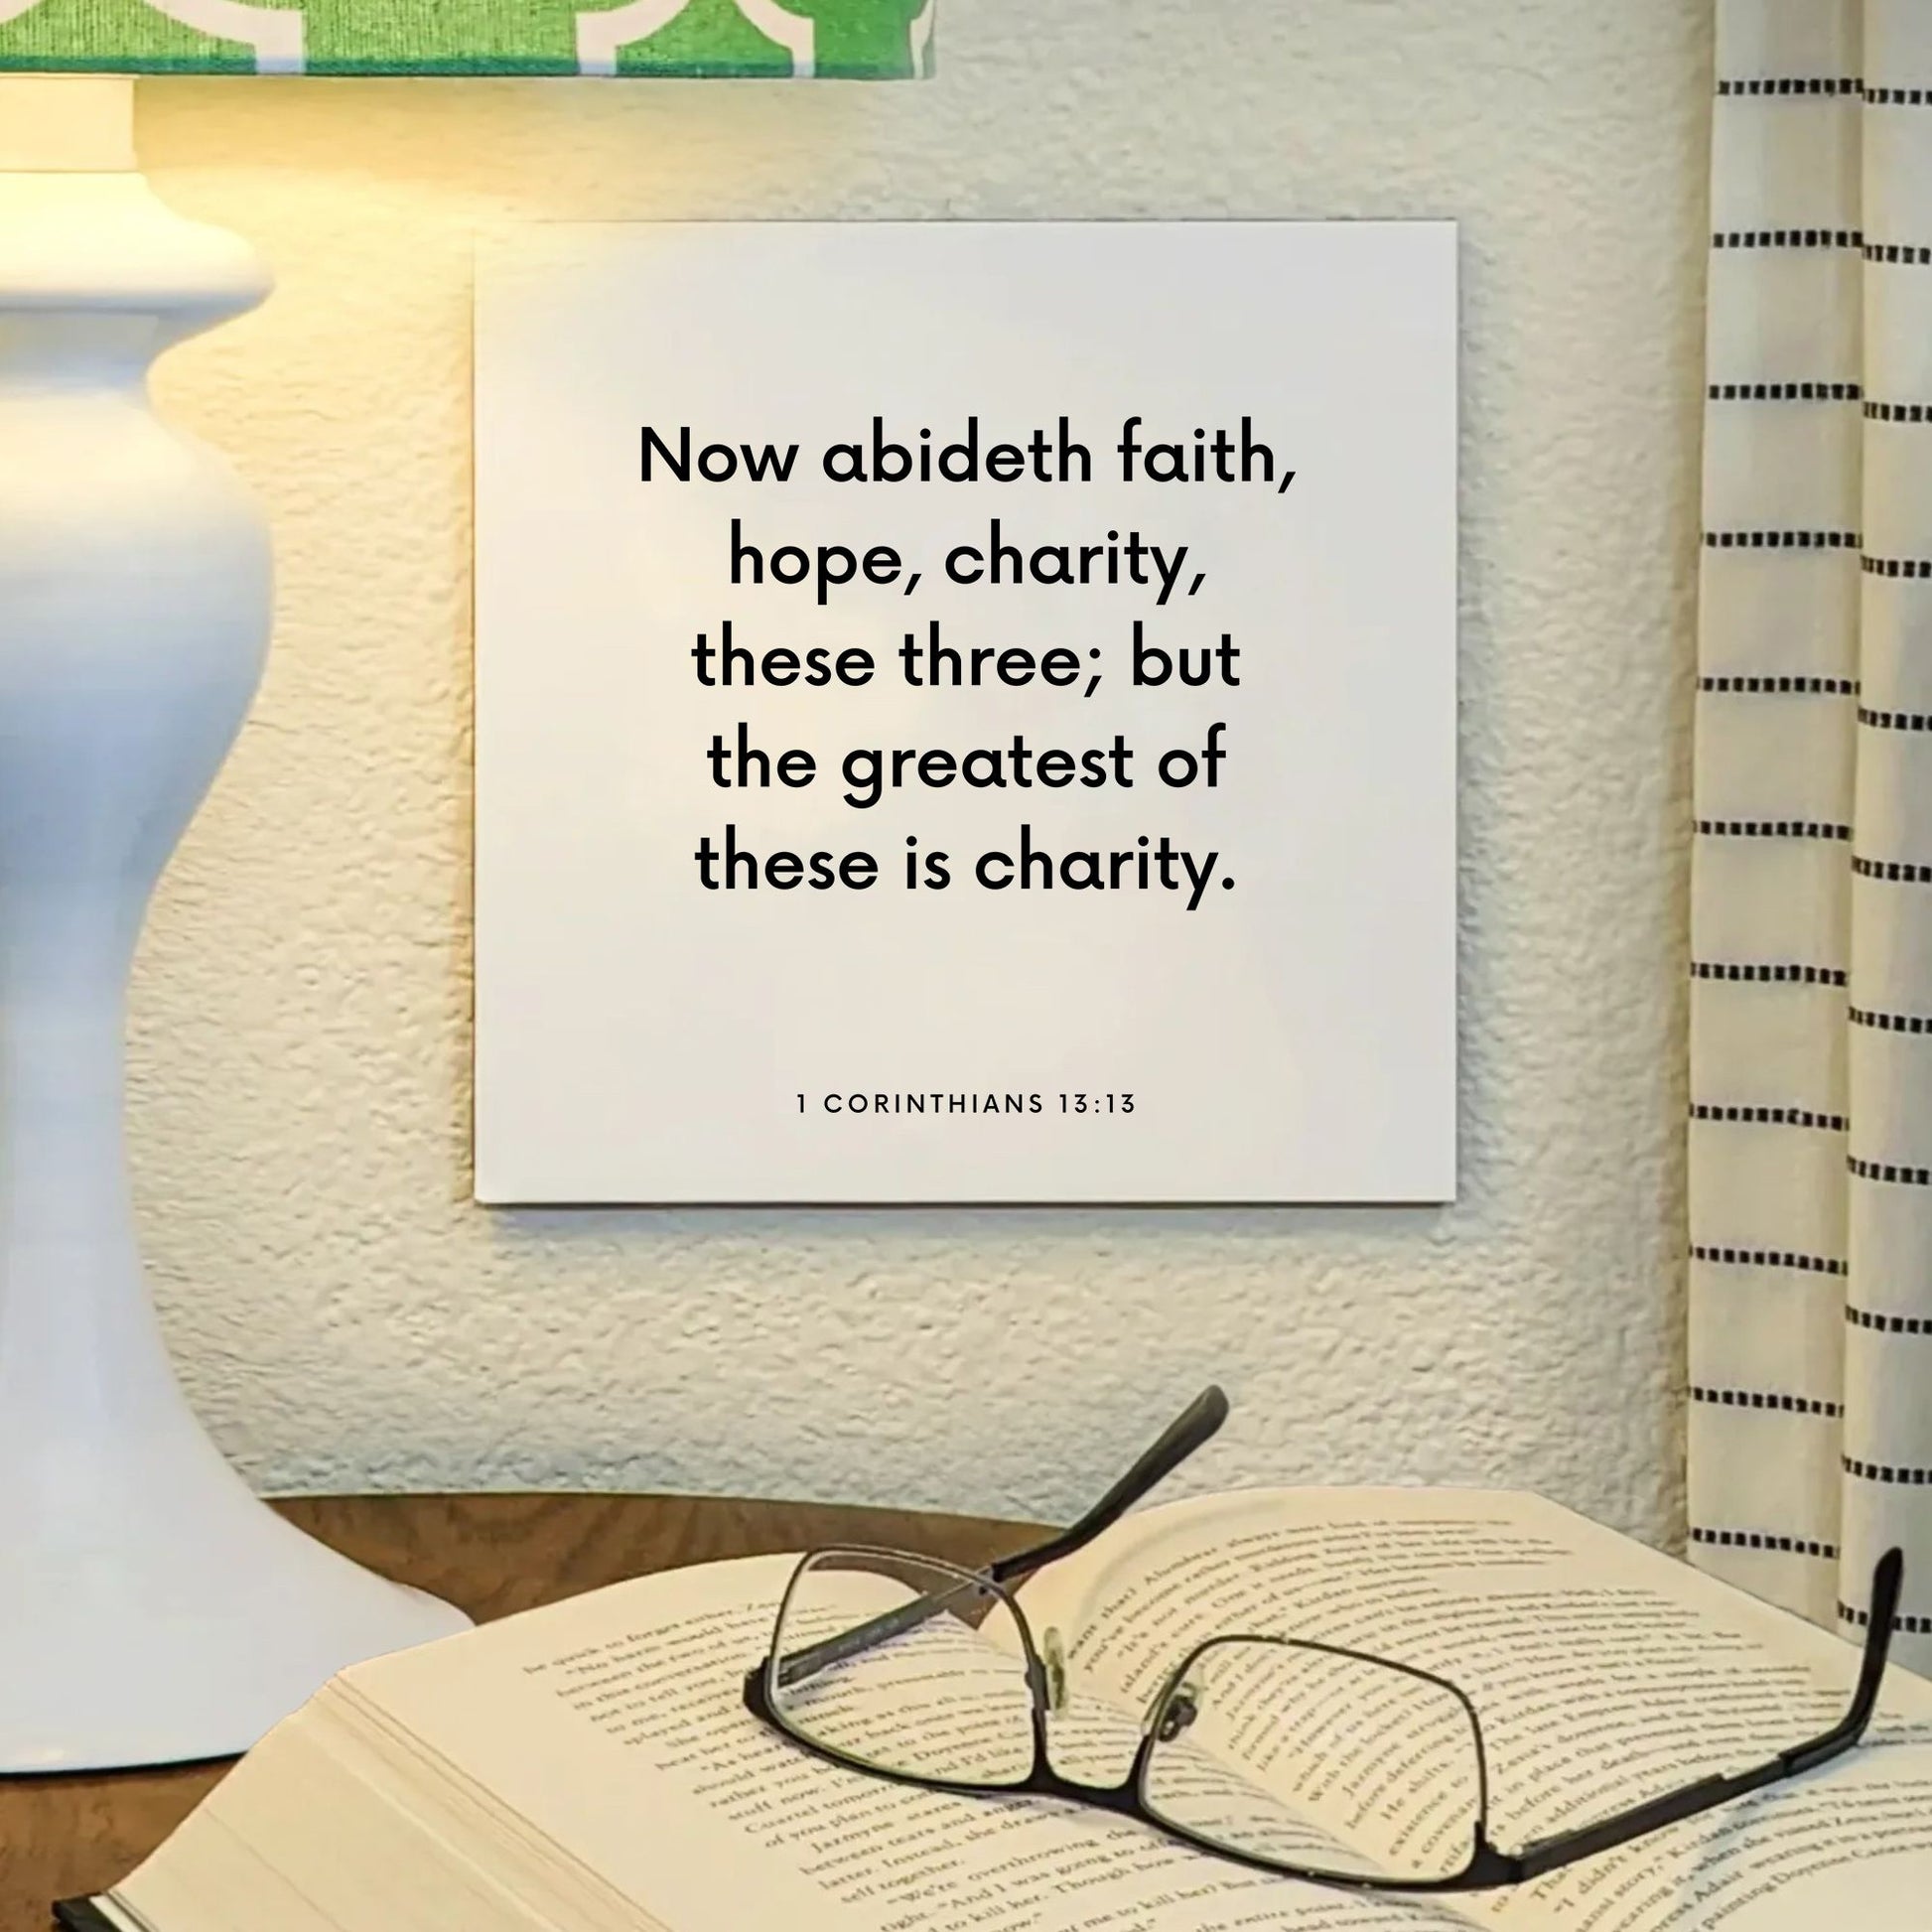 Lamp mouting of the scripture tile for 1 Corinthians 13:13 - "The greatest of these is charity"